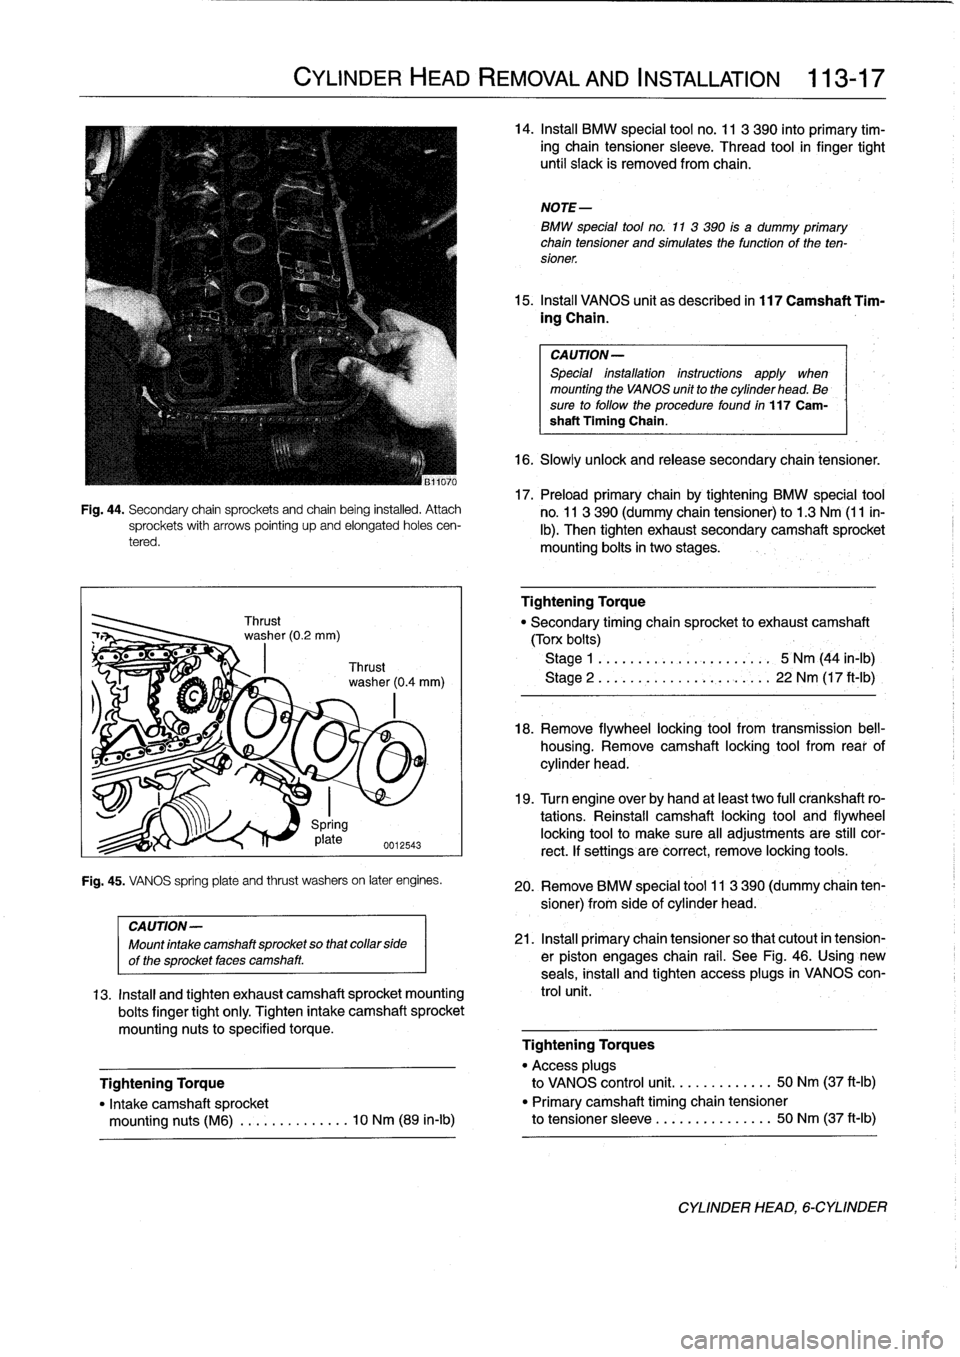 BMW 328i 1994 E36 Workshop Manual 
Fig
.
44
.
Secondary
chain
sprockets
and
chain
being
installed
.
Attachsprockets
with
arrows
pointing
upand
elongated
holes
cen-
tered
.

CYLINDER
HEAD
REMOVAL
AND
INSTALLATION

	

113-17

Spring
17
